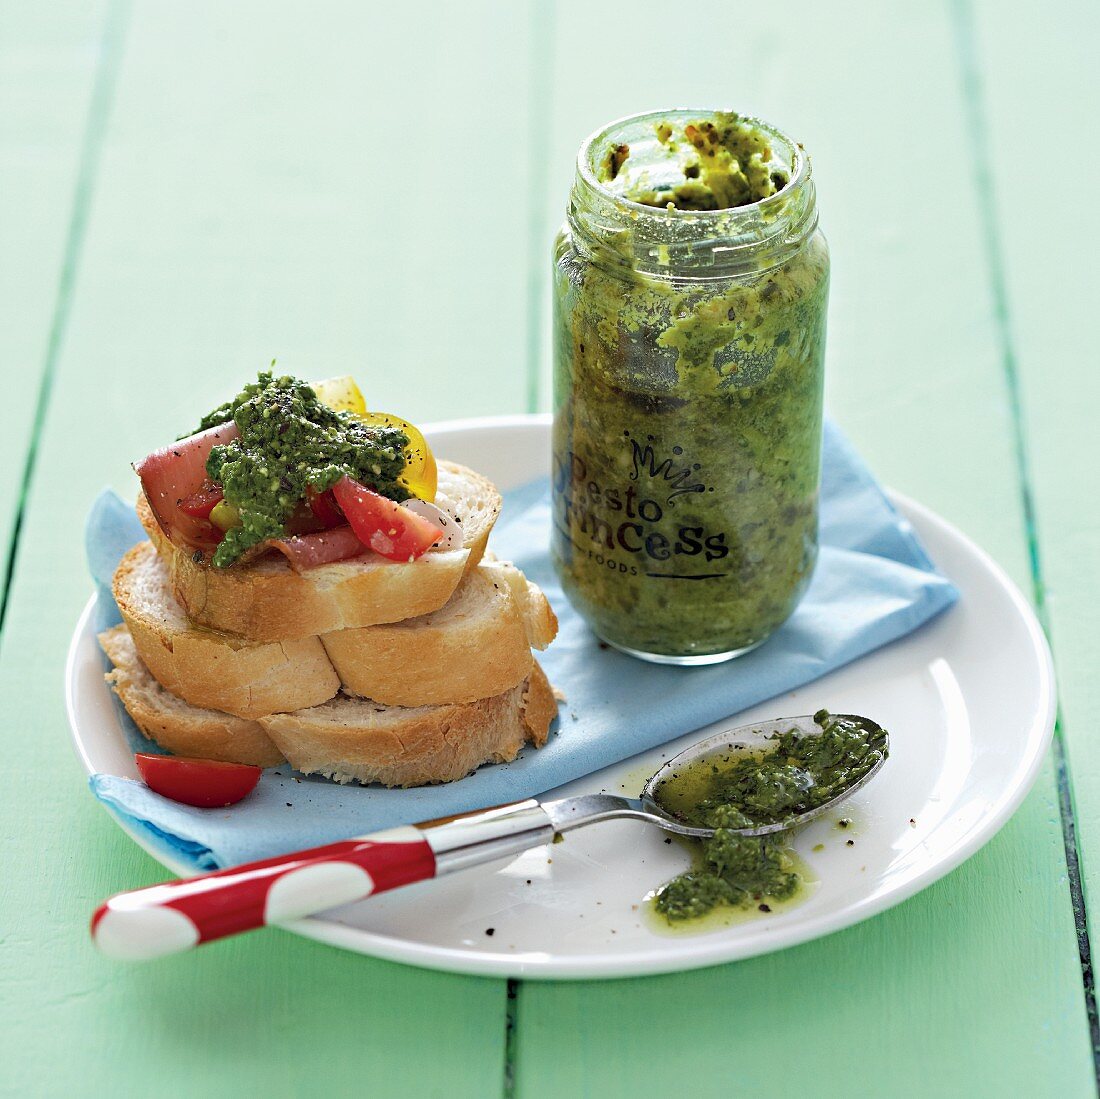 Pesto and bread with a topping